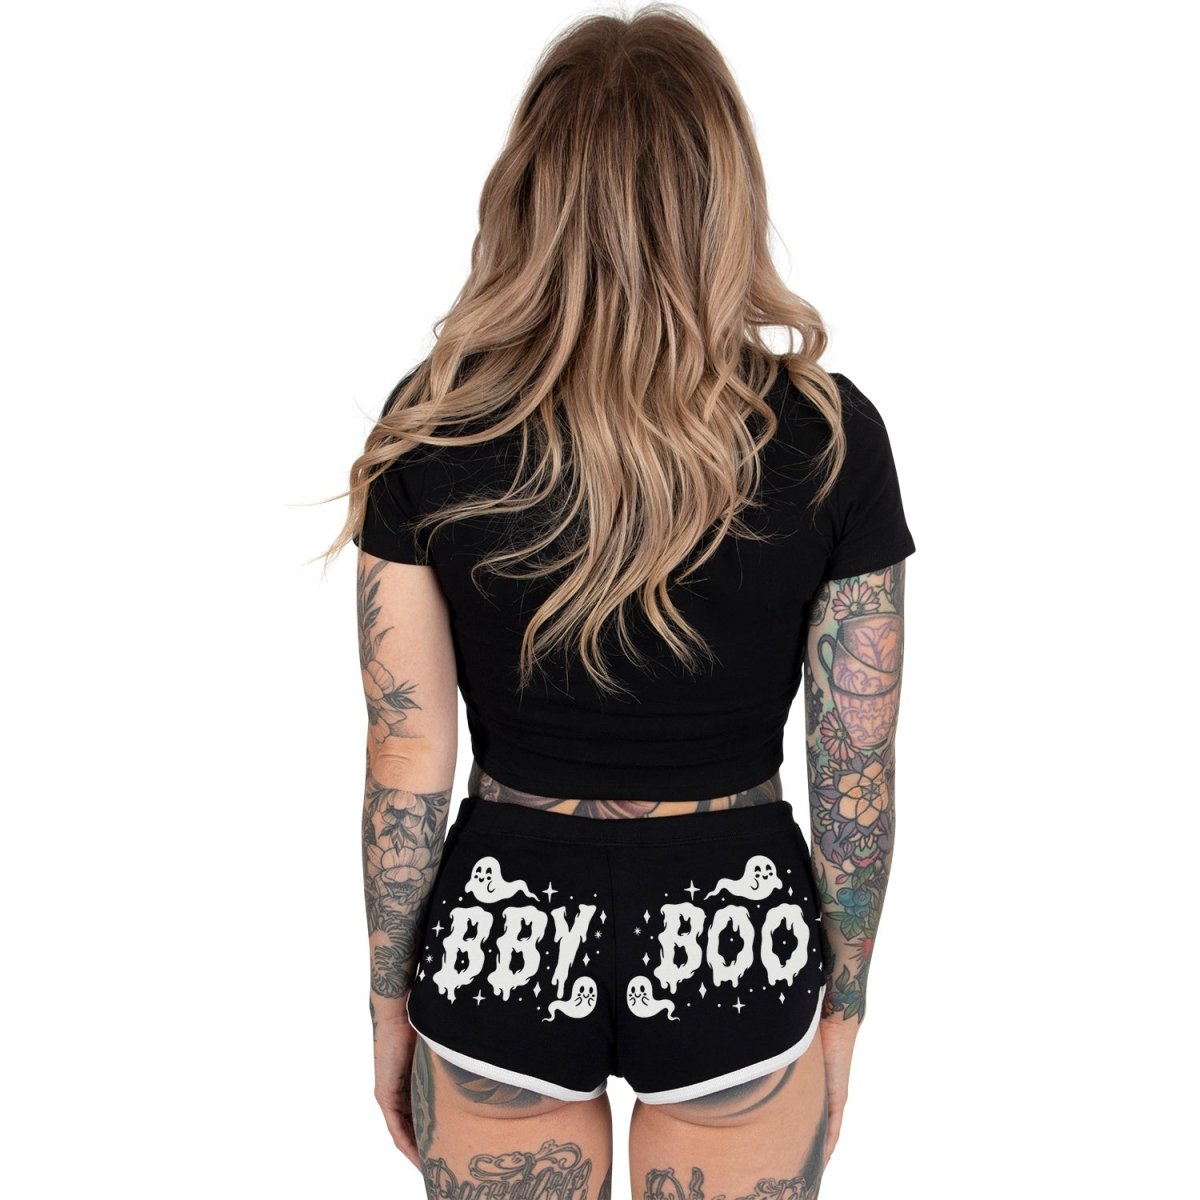 Too Fast | Baby Boo White Trim Short Shorts